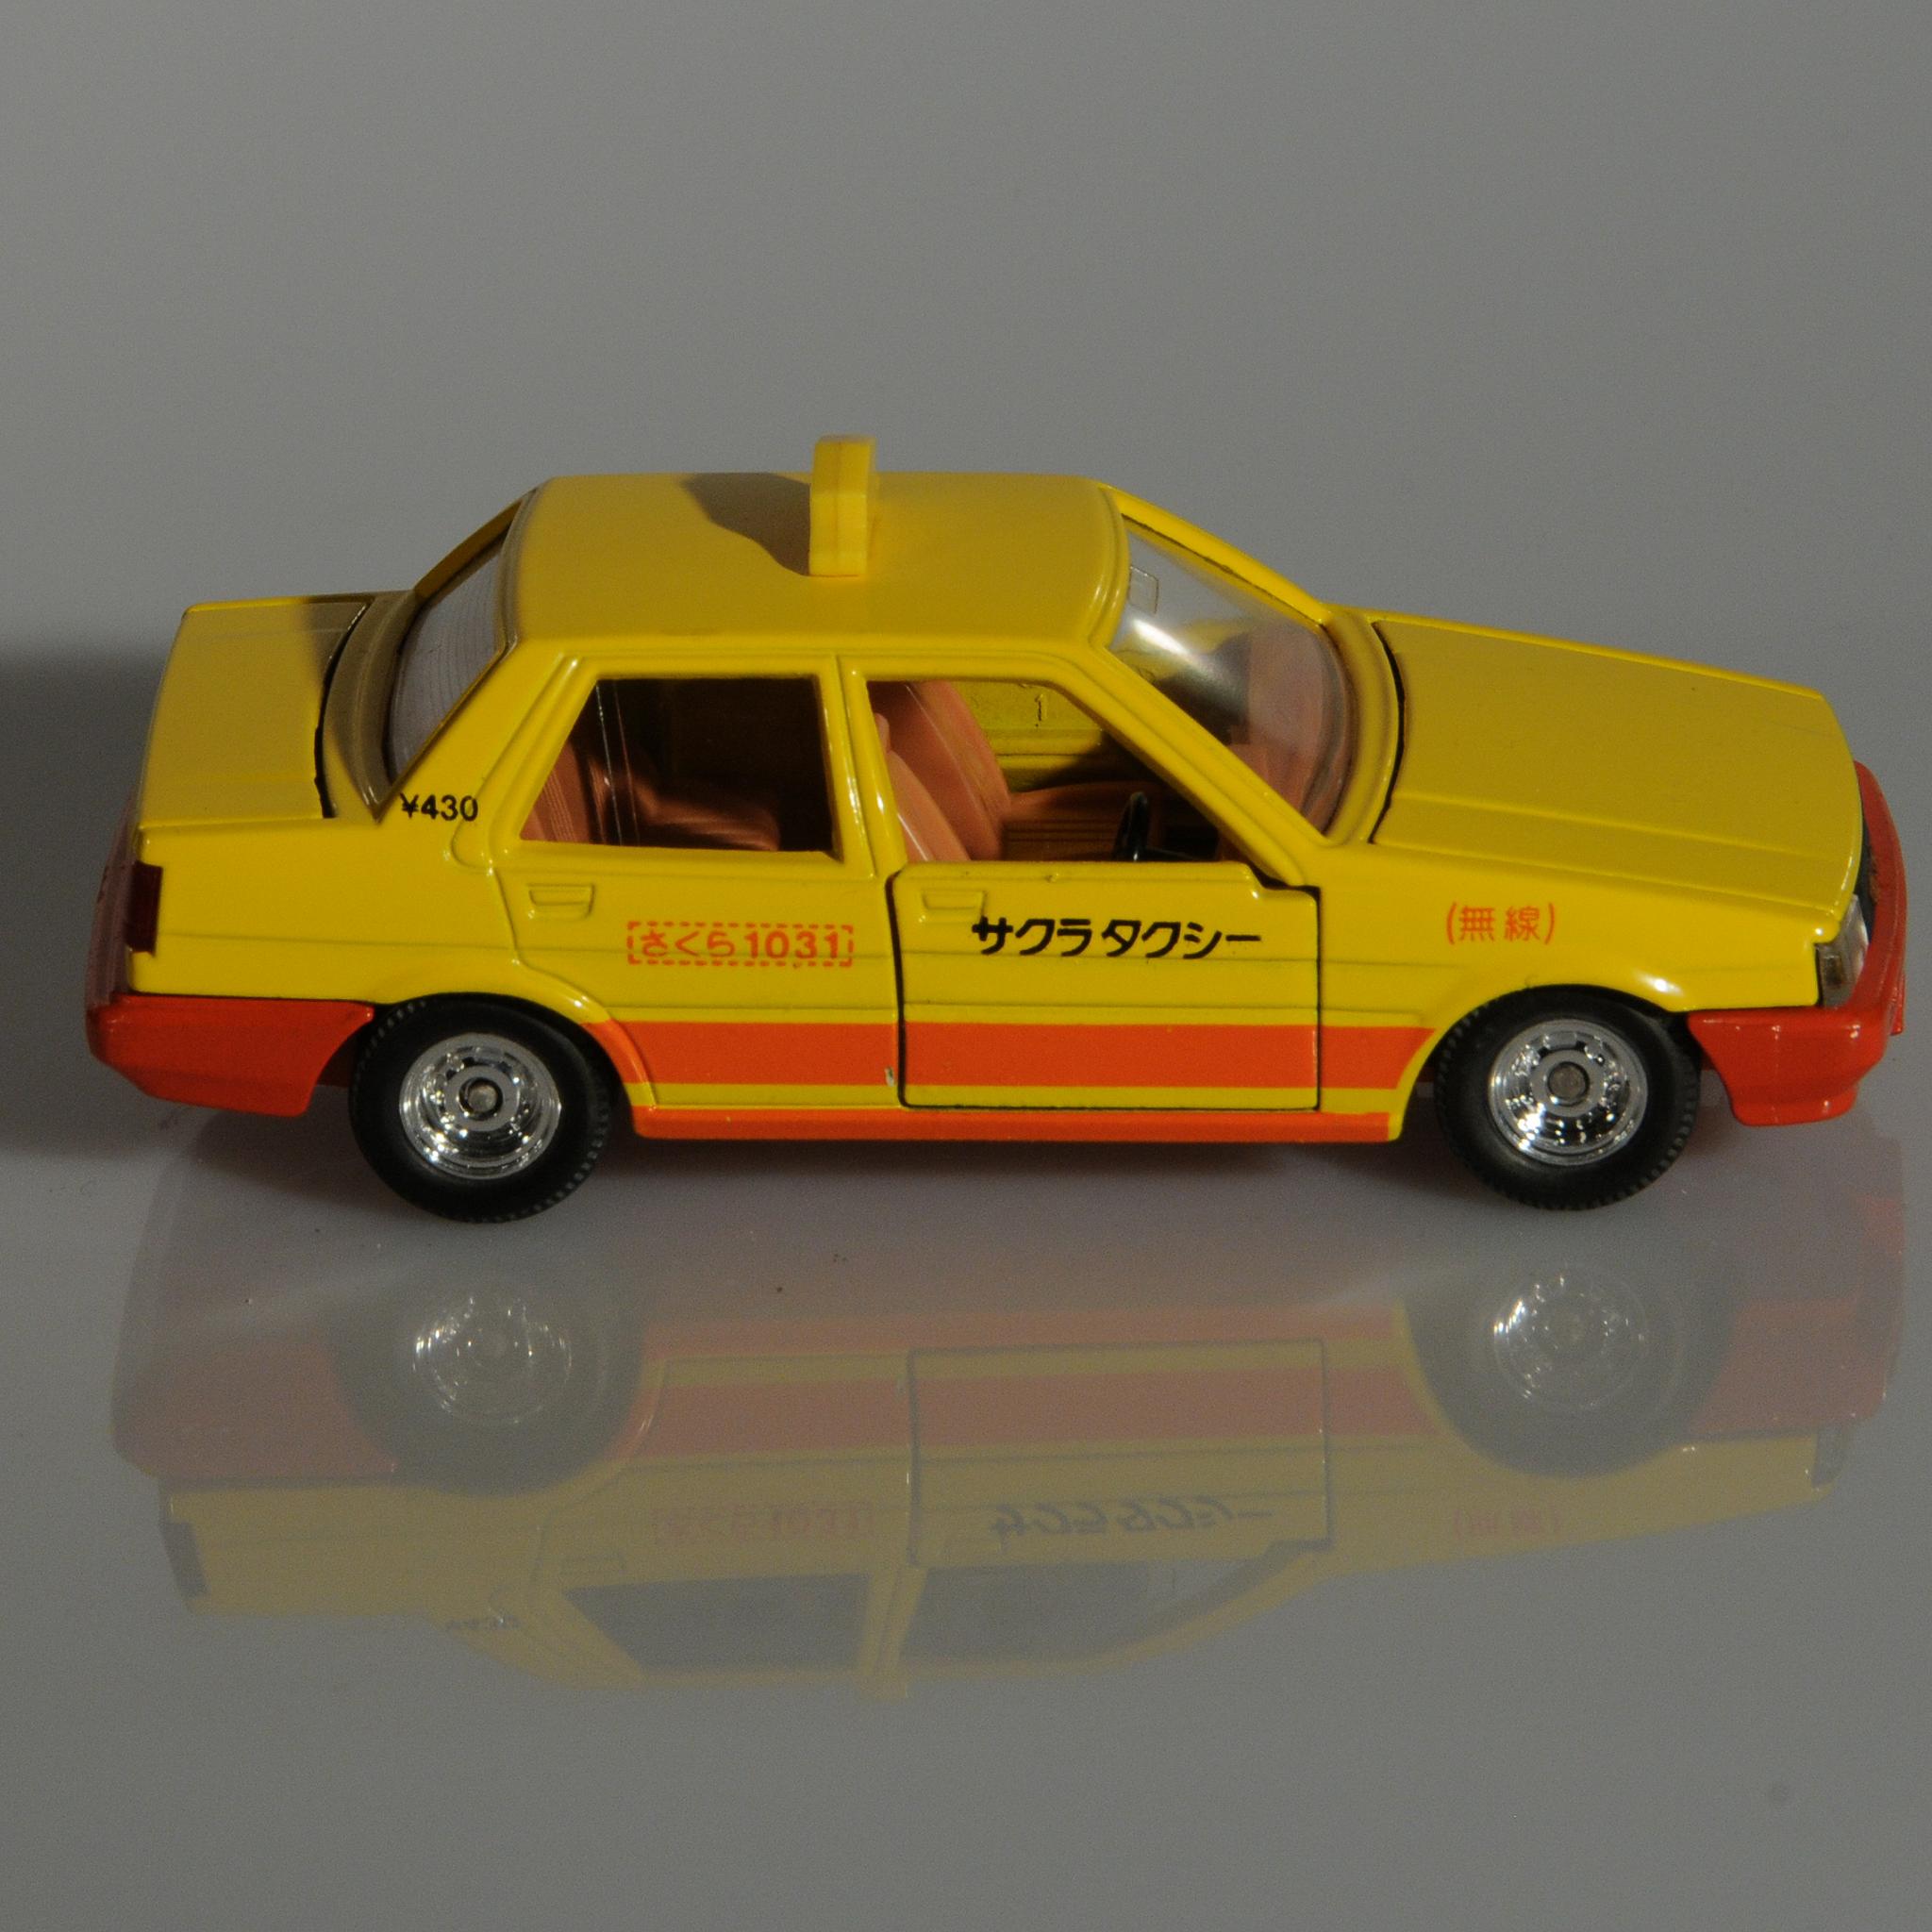 Tomica+Toyota+Corolla+Taxi+Diecast+Model+from+Japan+1%3A43 picture 1